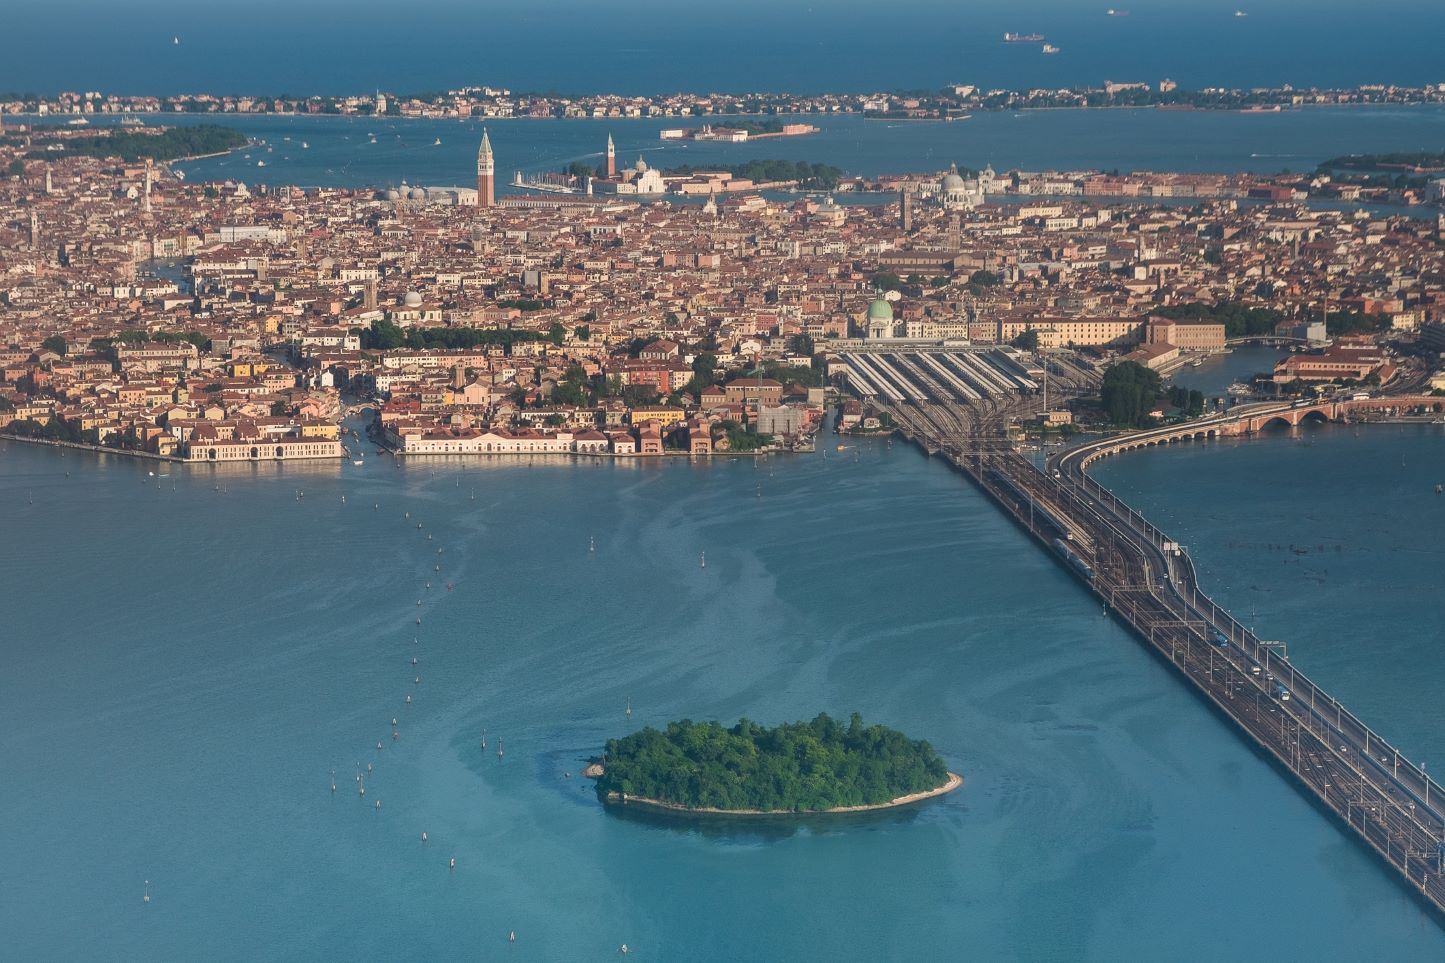 A sight over the historical centre of Venice, Italy, as seen from an airplane approaching to the international Marco Polo airport